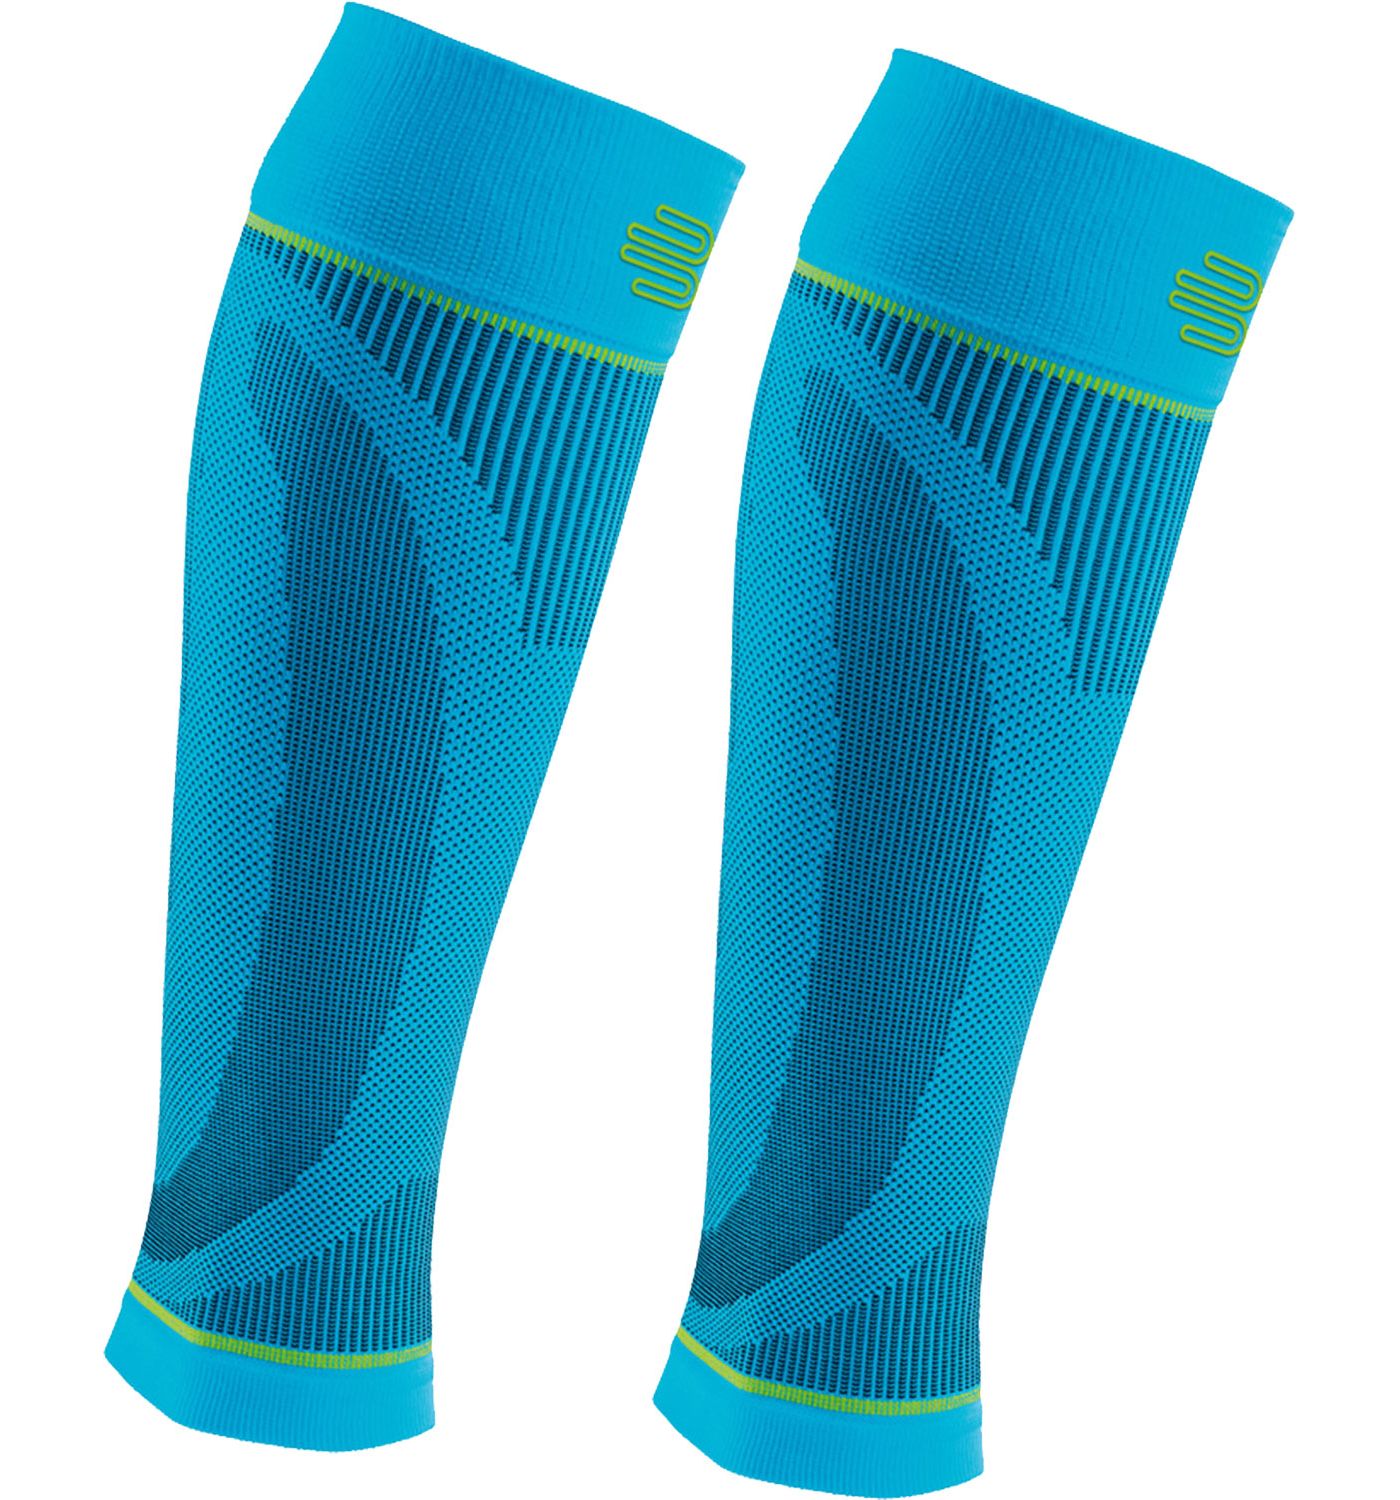 Bauerfeind Sports Compression Calf Sleeves | DICK'S Sporting Goods